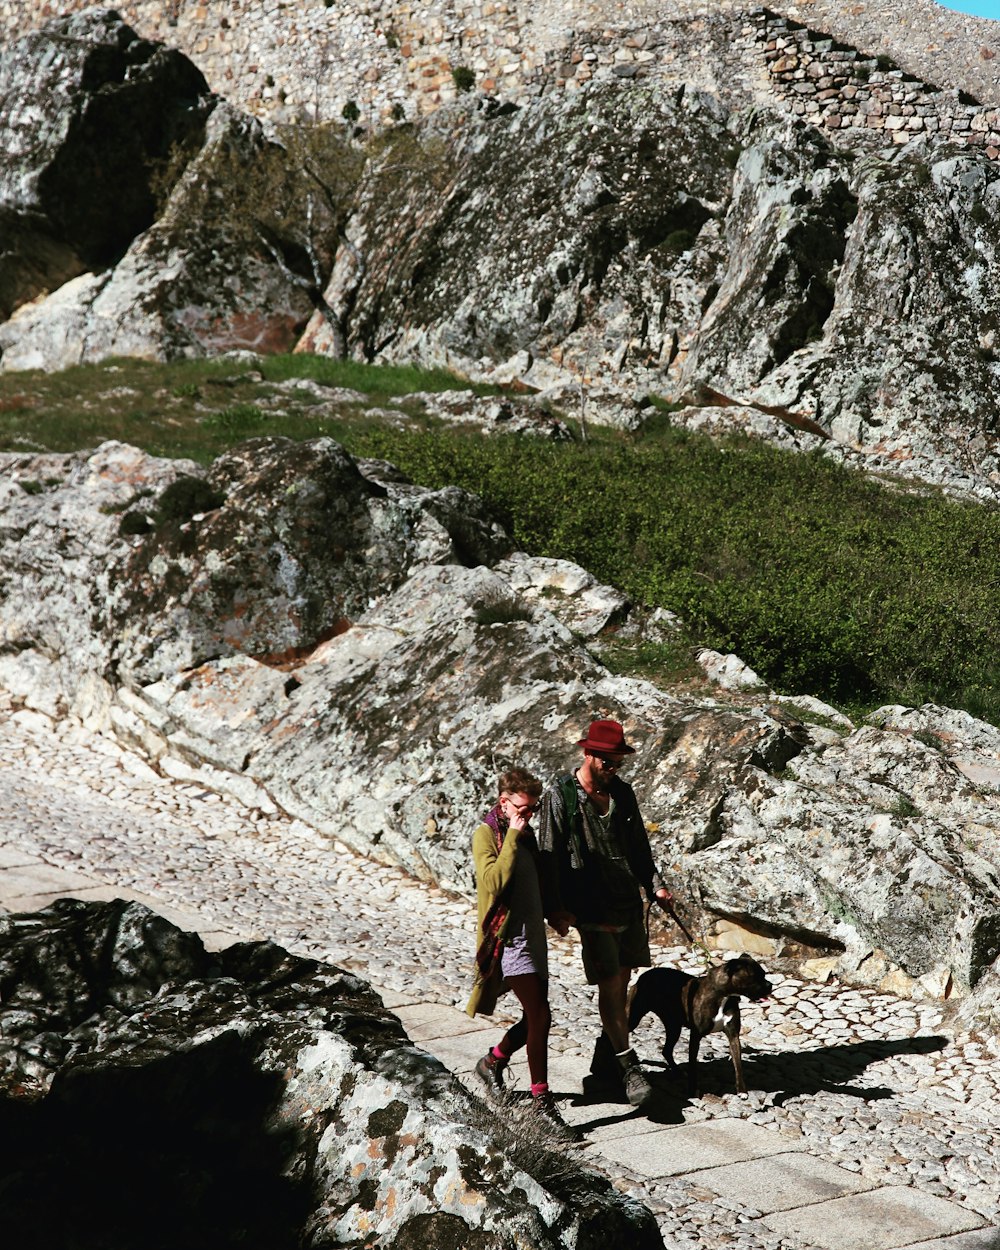 woman in red jacket standing beside black and brown short coated dog on rocky mountain during